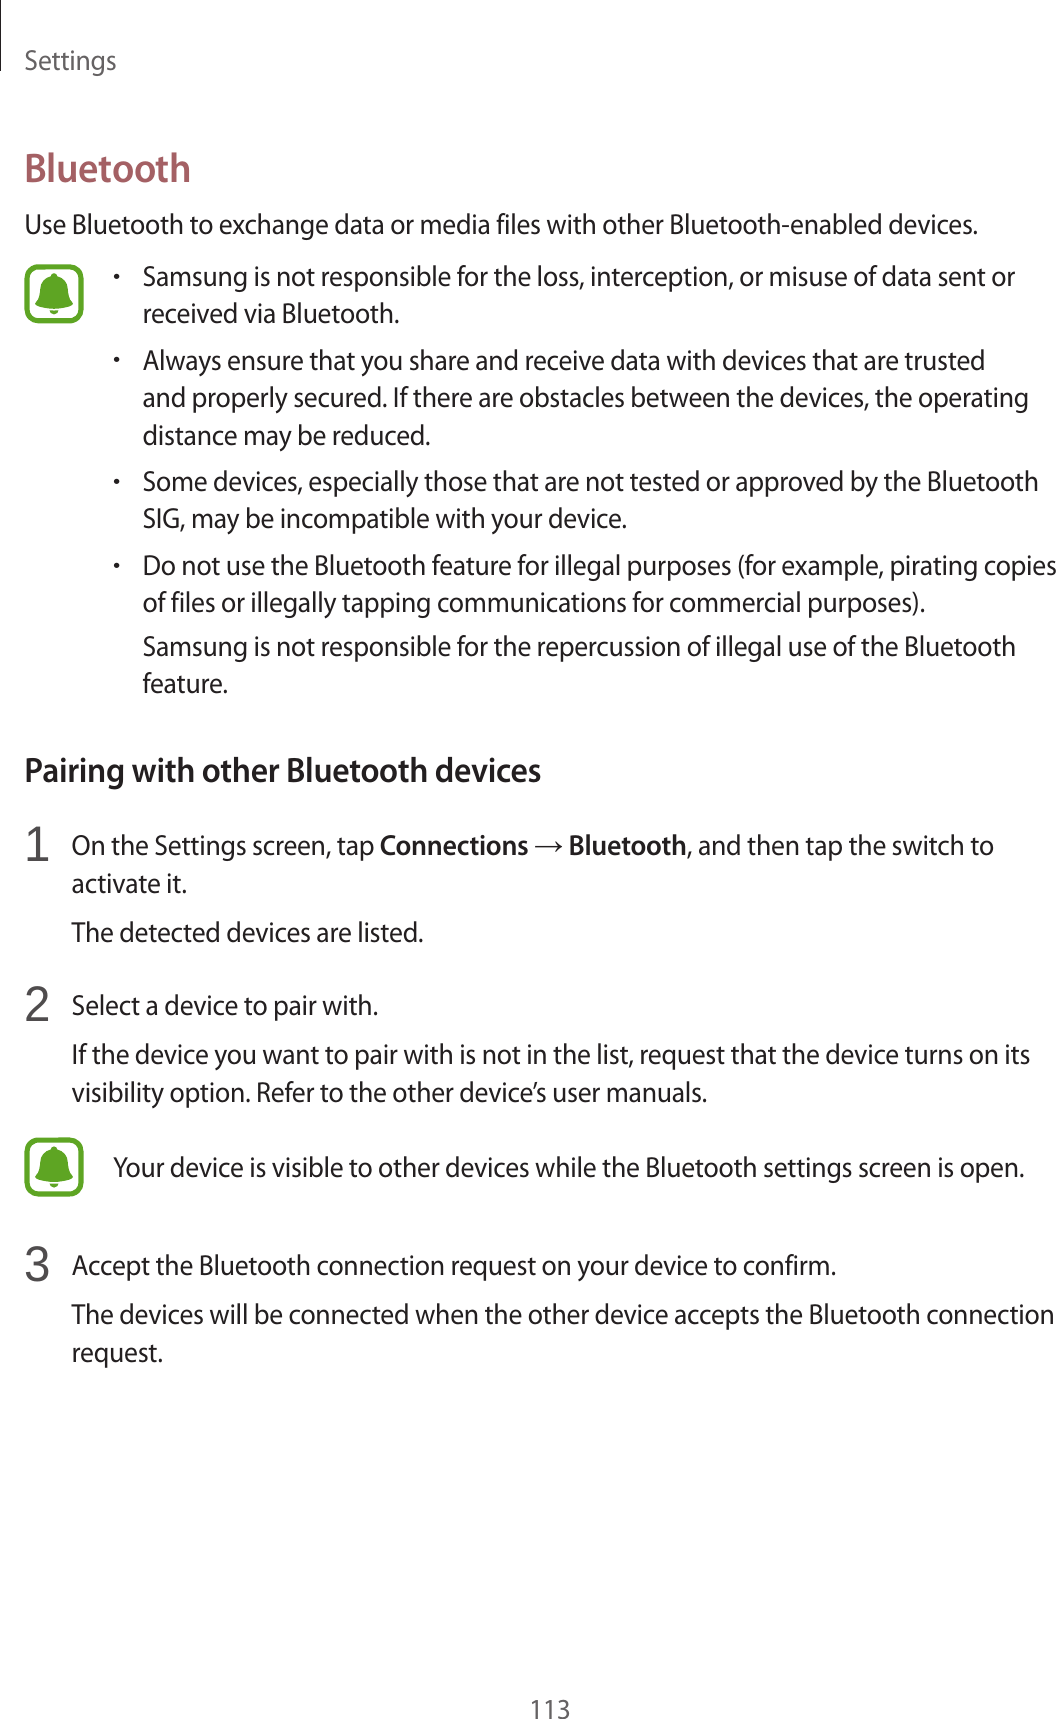 Settings113BluetoothUse Bluetooth to exchange data or media files with other Bluetooth-enabled devices.•Samsung is not responsible for the loss, interception, or misuse of data sent or received via Bluetooth.•Always ensure that you share and receive data with devices that are trusted and properly secured. If there are obstacles between the devices, the operating distance may be reduced.•Some devices, especially those that are not tested or approved by the Bluetooth SIG, may be incompatible with your device.•Do not use the Bluetooth feature for illegal purposes (for example, pirating copies of files or illegally tapping communications for commercial purposes).Samsung is not responsible for the repercussion of illegal use of the Bluetooth feature.Pairing with other Bluetooth devices1  On the Settings screen, tap Connections → Bluetooth, and then tap the switch to activate it.The detected devices are listed.2  Select a device to pair with.If the device you want to pair with is not in the list, request that the device turns on its visibility option. Refer to the other device’s user manuals.Your device is visible to other devices while the Bluetooth settings screen is open.3  Accept the Bluetooth connection request on your device to confirm.The devices will be connected when the other device accepts the Bluetooth connection request.